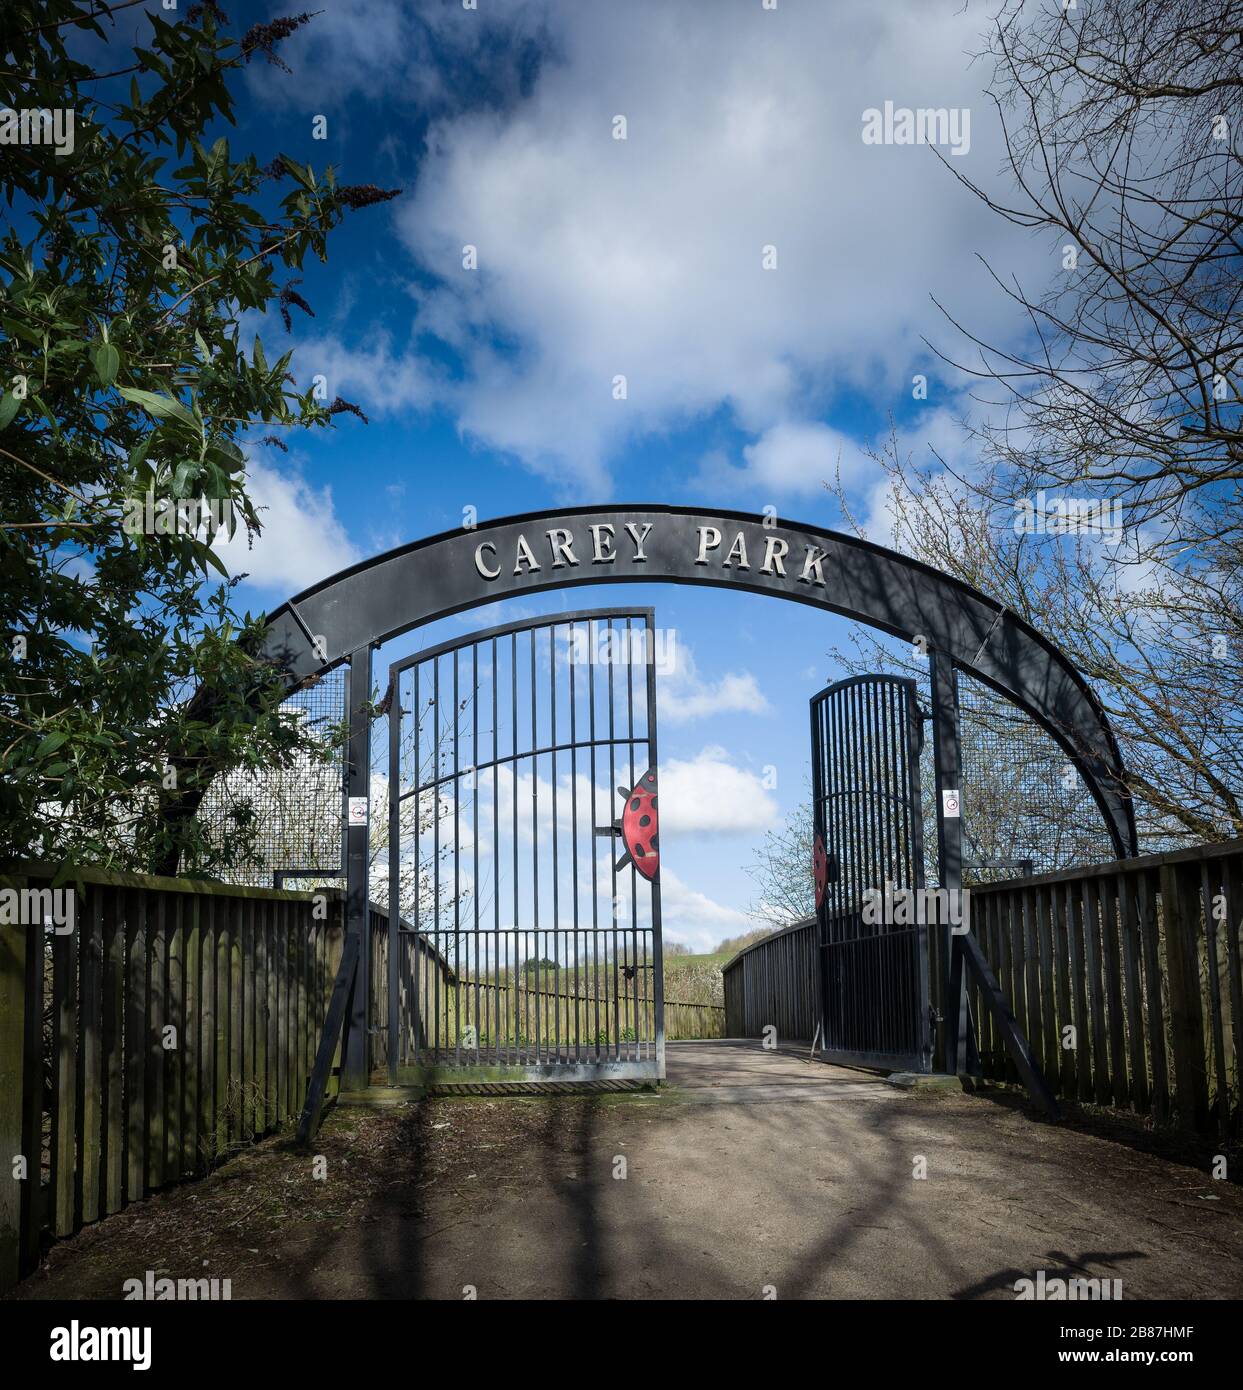 The entrance to Carey Park, Northwich, Cheshire - Carey Park is located on the site of the former Witton landfill. A seven year reclamation project tu Stock Photo